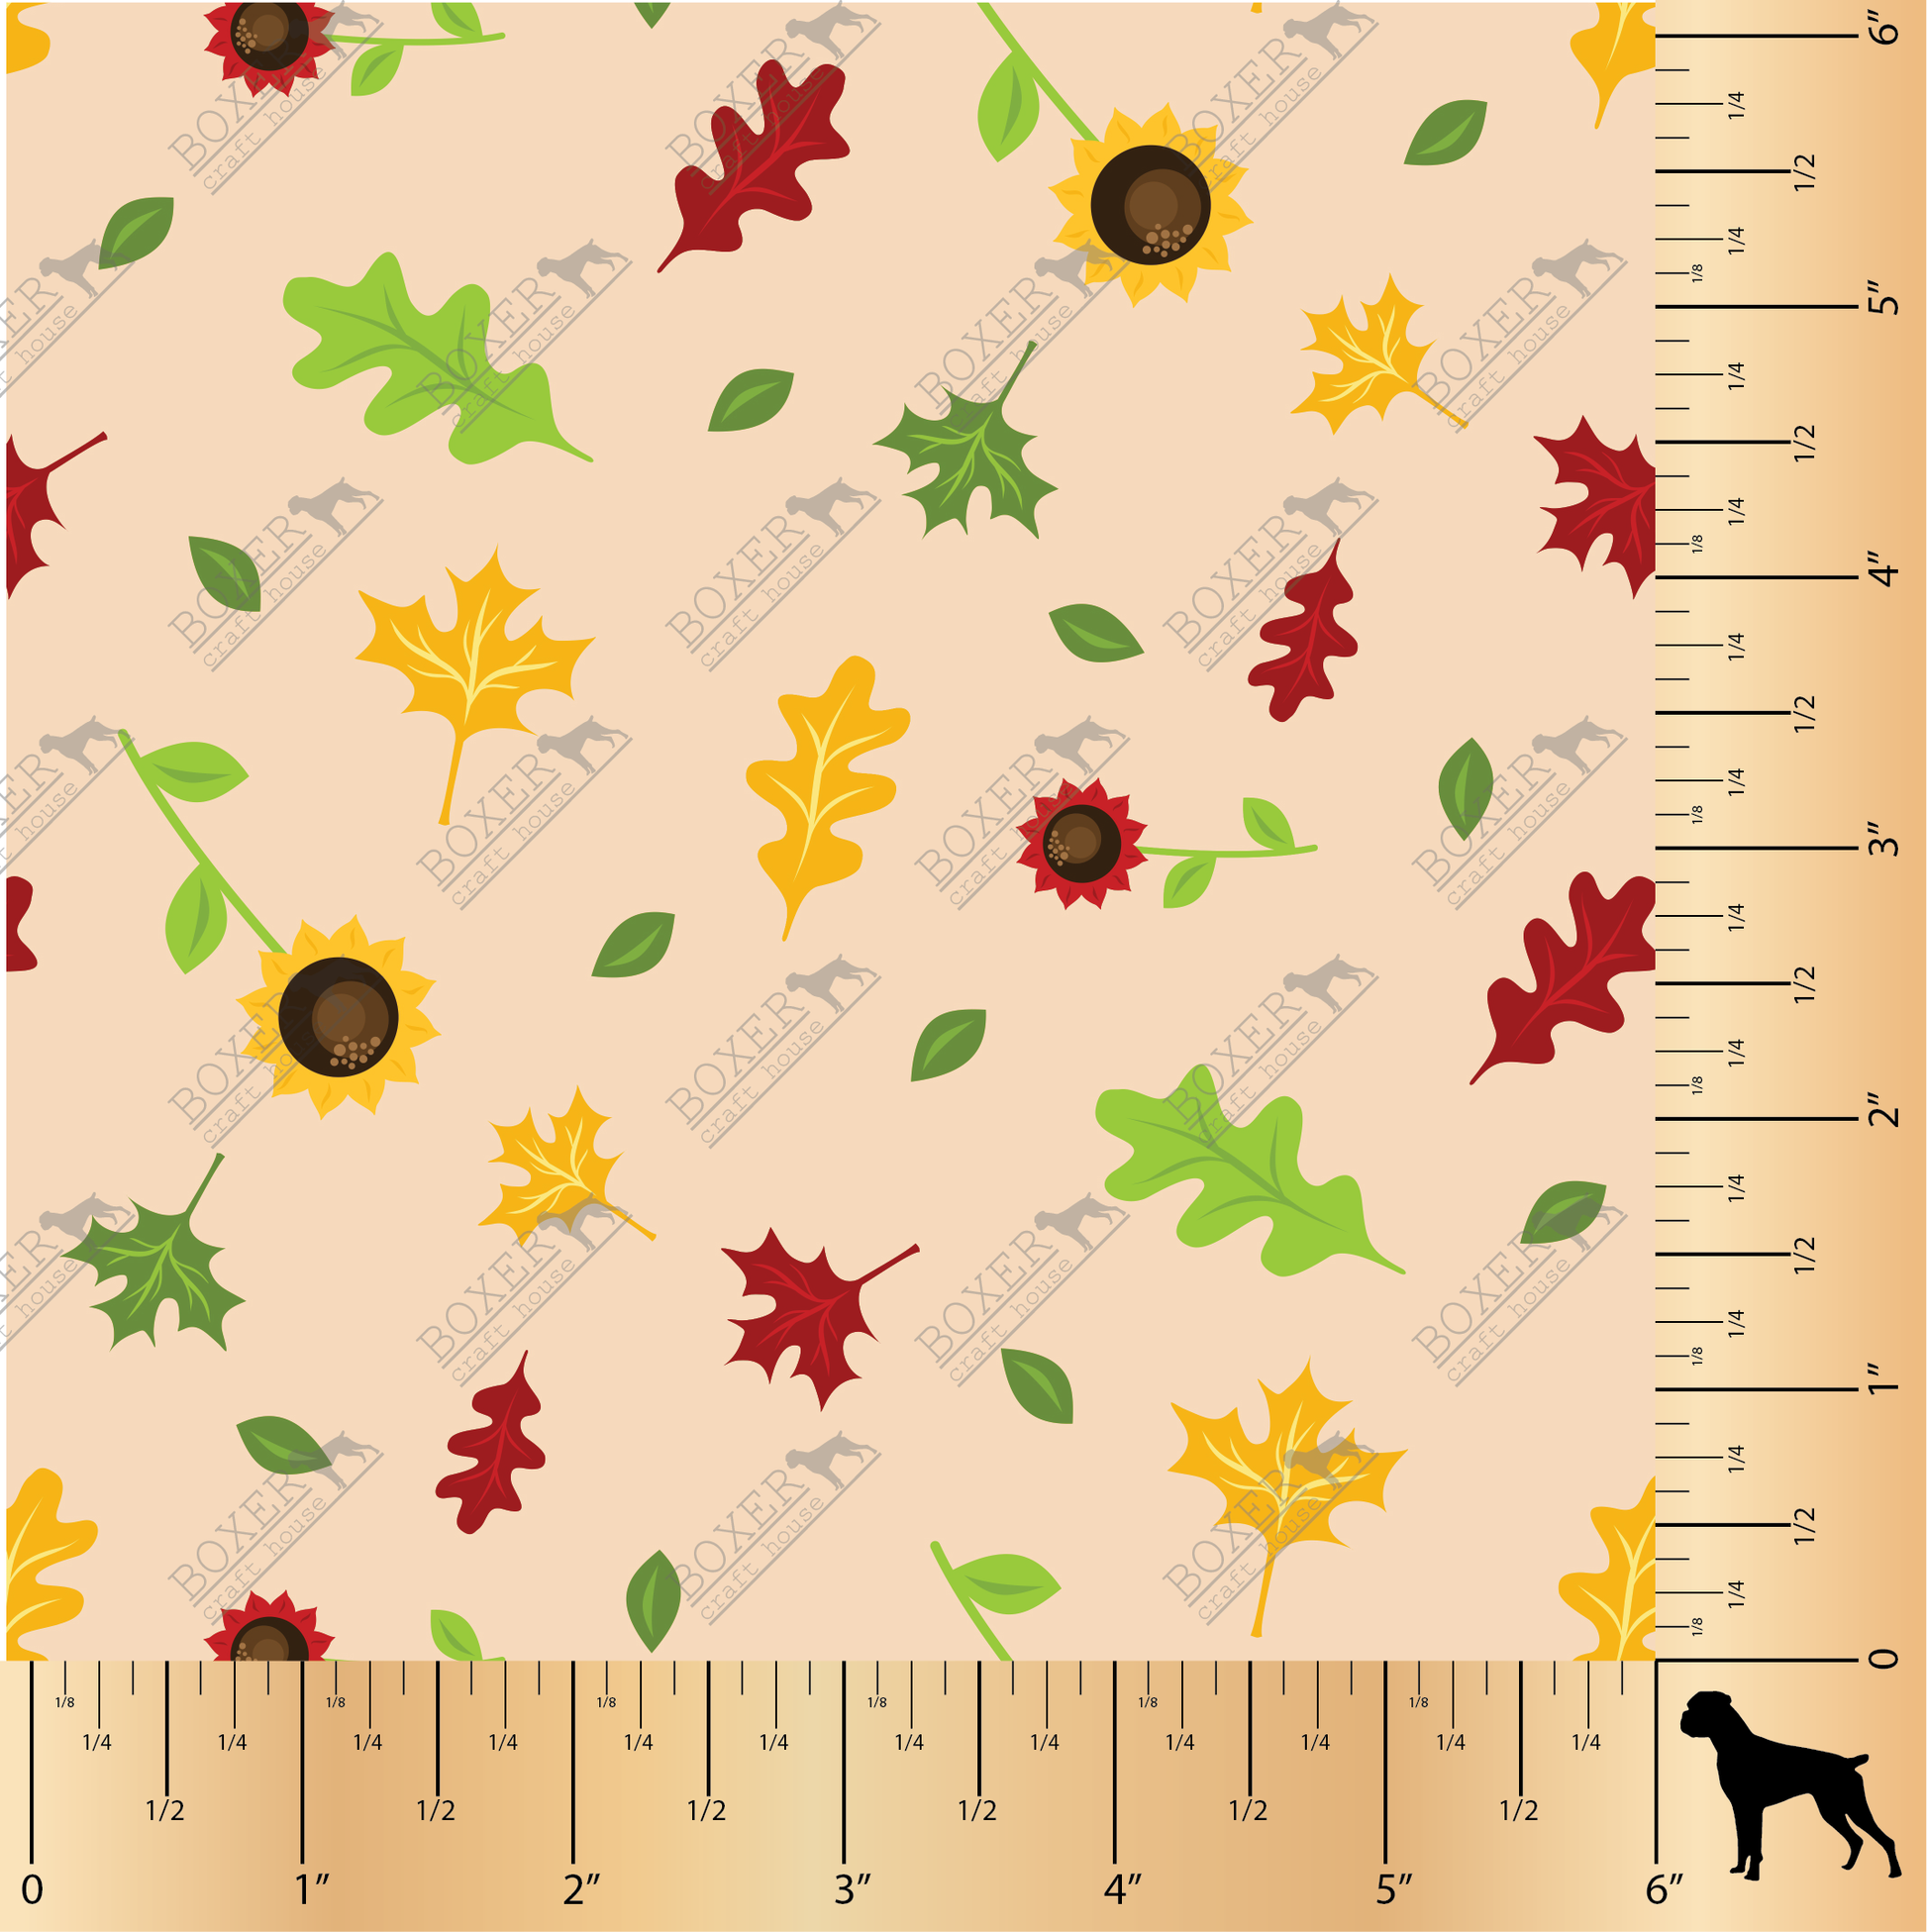 Autumn Themed Faux Leather, Embroidery Vinyl, Sewing Faux Leather, Bag Making Supplies, Faux Leather For Embroidery, Quality Faux Leather, Embroidery Supplies, Sewing Supplies, Woman Owned Business, Craft Supply Store, USA, In the Hoop Supplies, Sewing with vinyl,Specialty Vinyl, Printed in the USA Faux Leather, Apples, Fall, Plaids, Orange, Crisp Air,